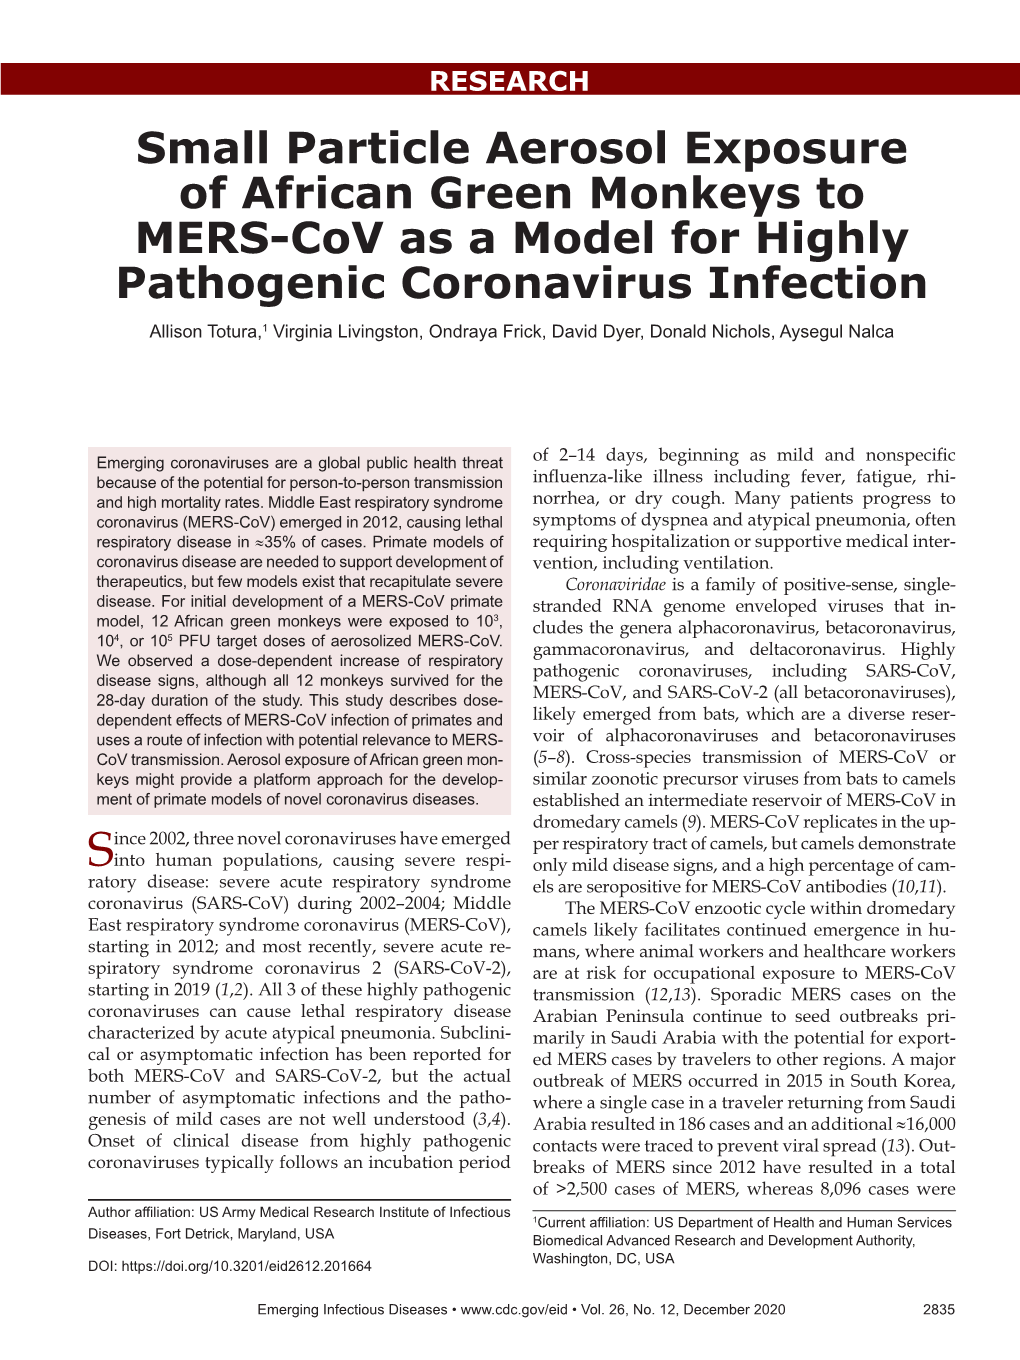 Small Particle Aerosol Exposure of African Green Monkeys to MERS